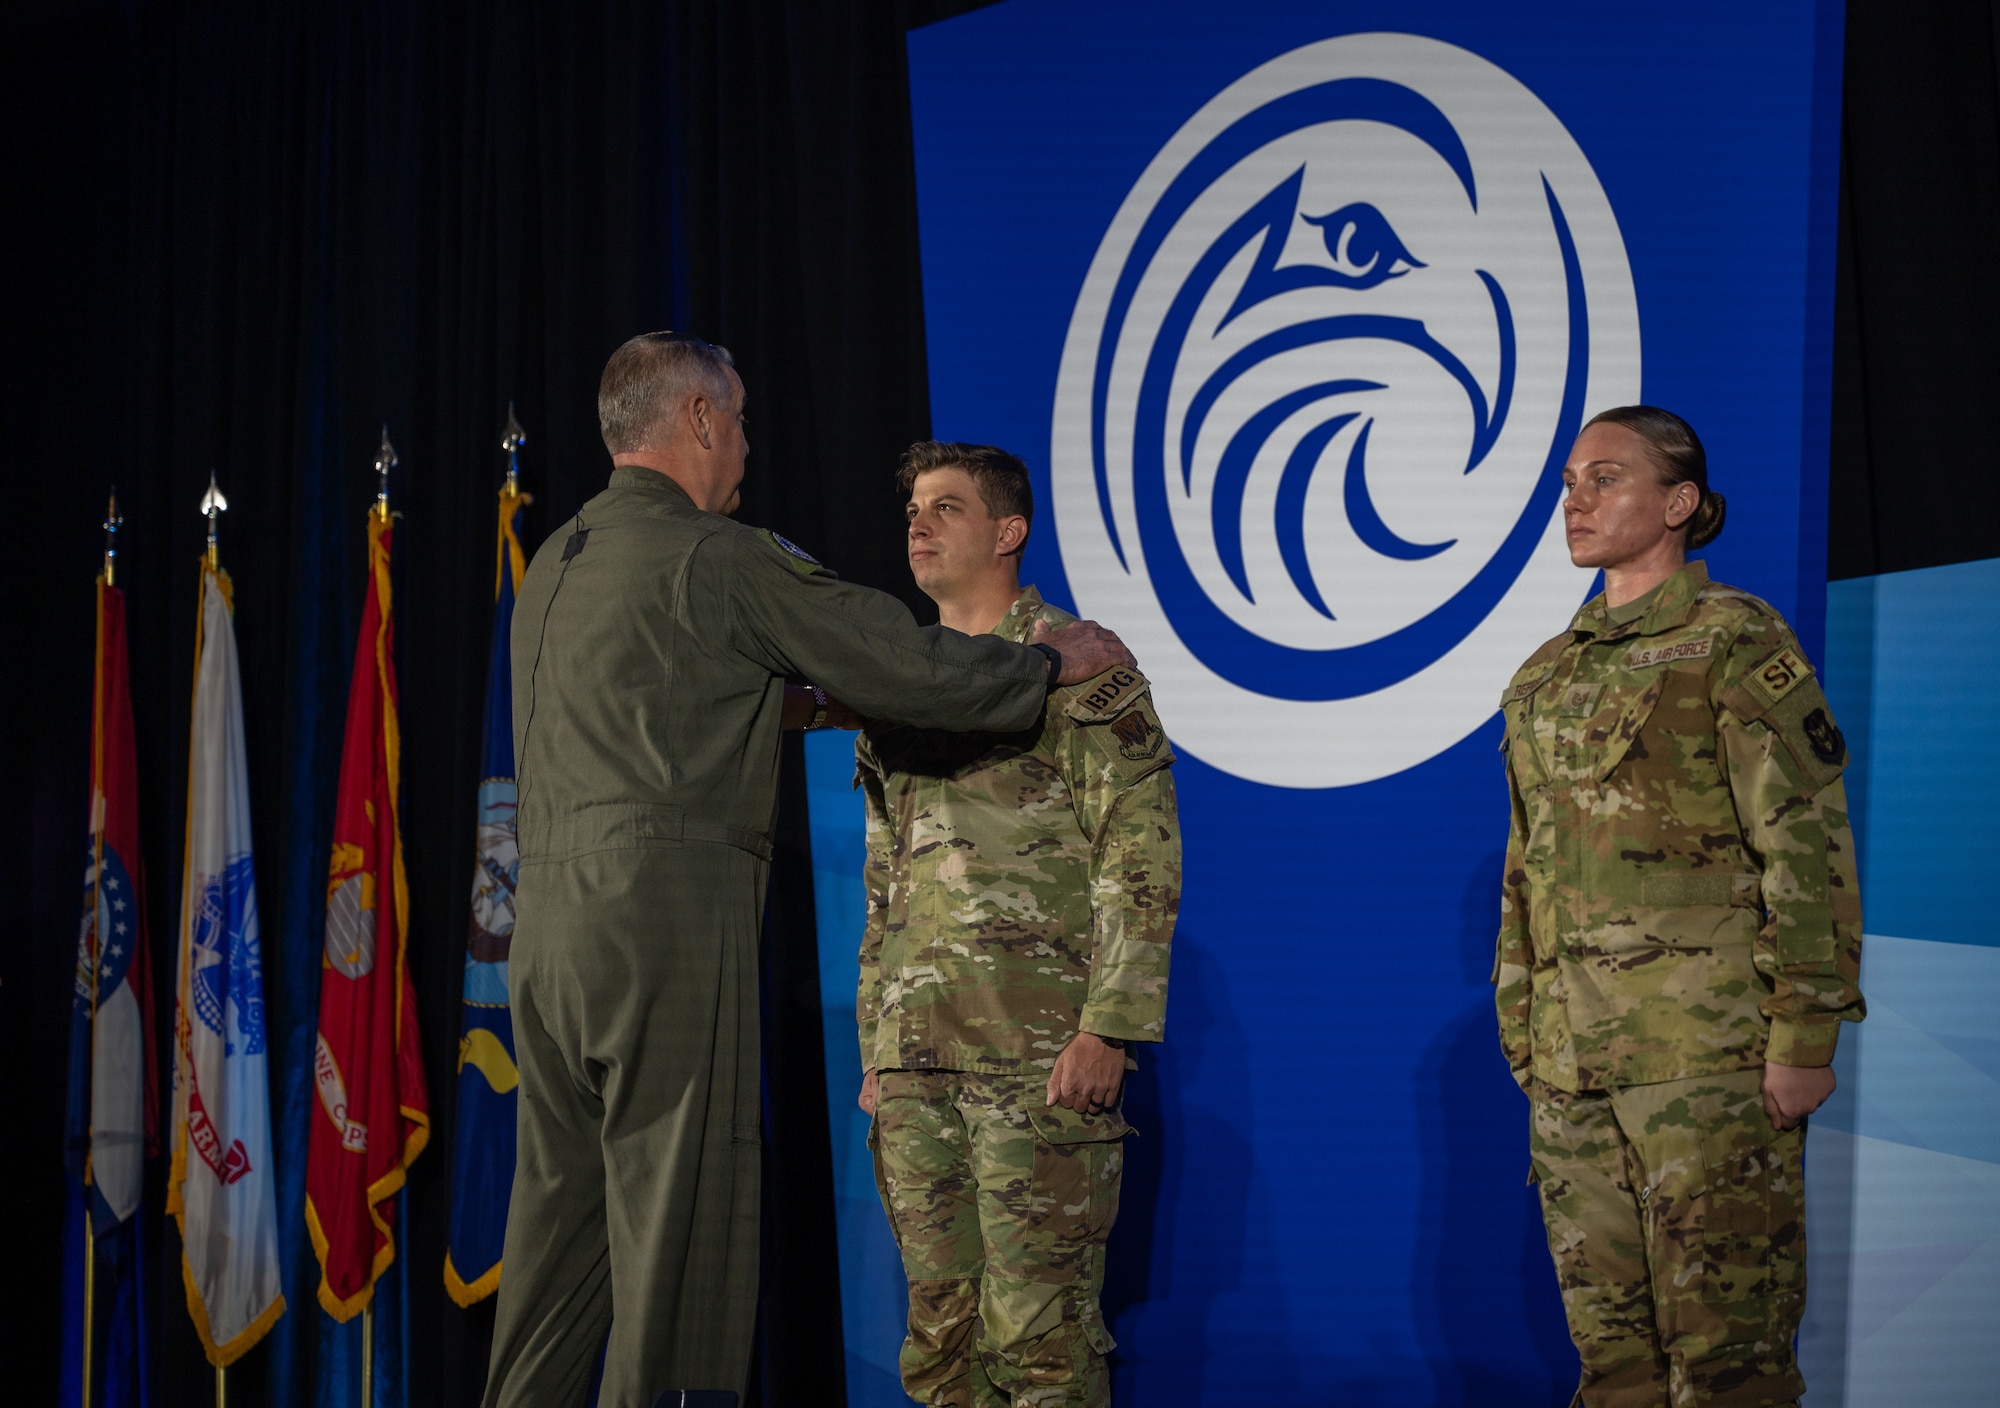 Gen. Mike Minihan, Commander of Air Mobility Command, presents TSgt Joshua Cramer from the 822 Base Defense Squadron and TSgt Tara Repose from the 514 Security Forces Squadron with Distinguished Flying Crosses with Combat Devices at the 2024 Logistics Officers Association Symposium. (U.S. Air Force photo by Air Mobility Command Public Affairs)